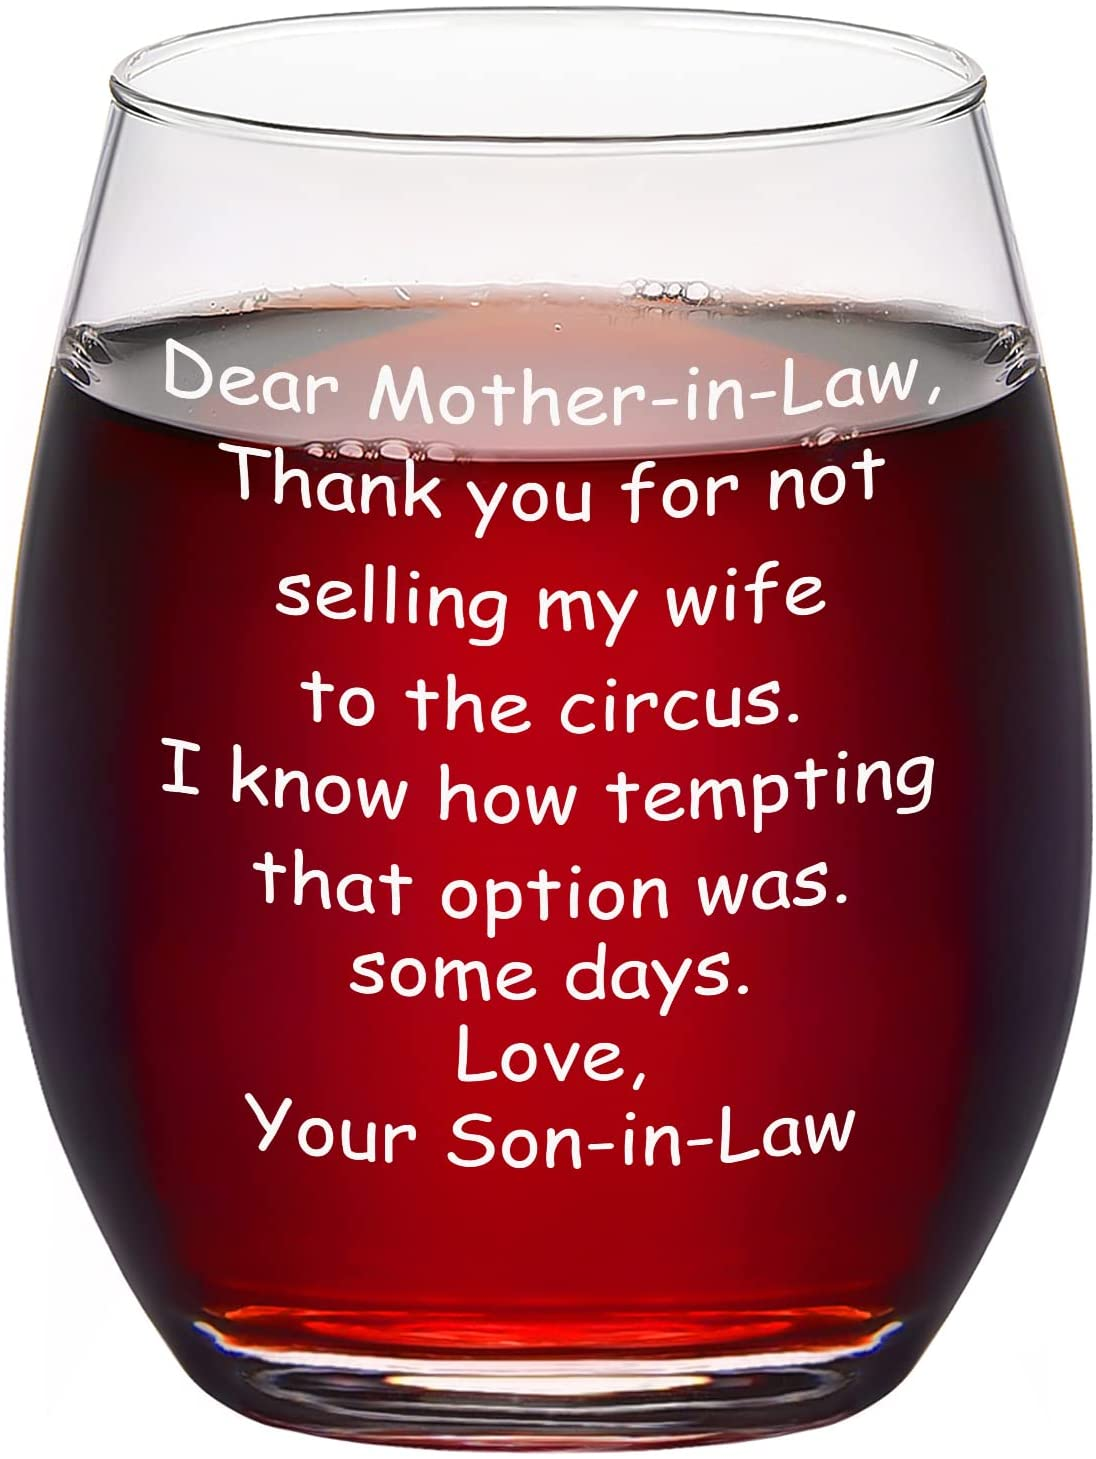 DAZLUTE Mother in Law Gifts, 15Oz Mother in Law Wine Glass, Funny Mother’S Day Gifts, Birthday Gifts, Wedding or Christmas Gifts Idea for Mother in Law from Son in Law